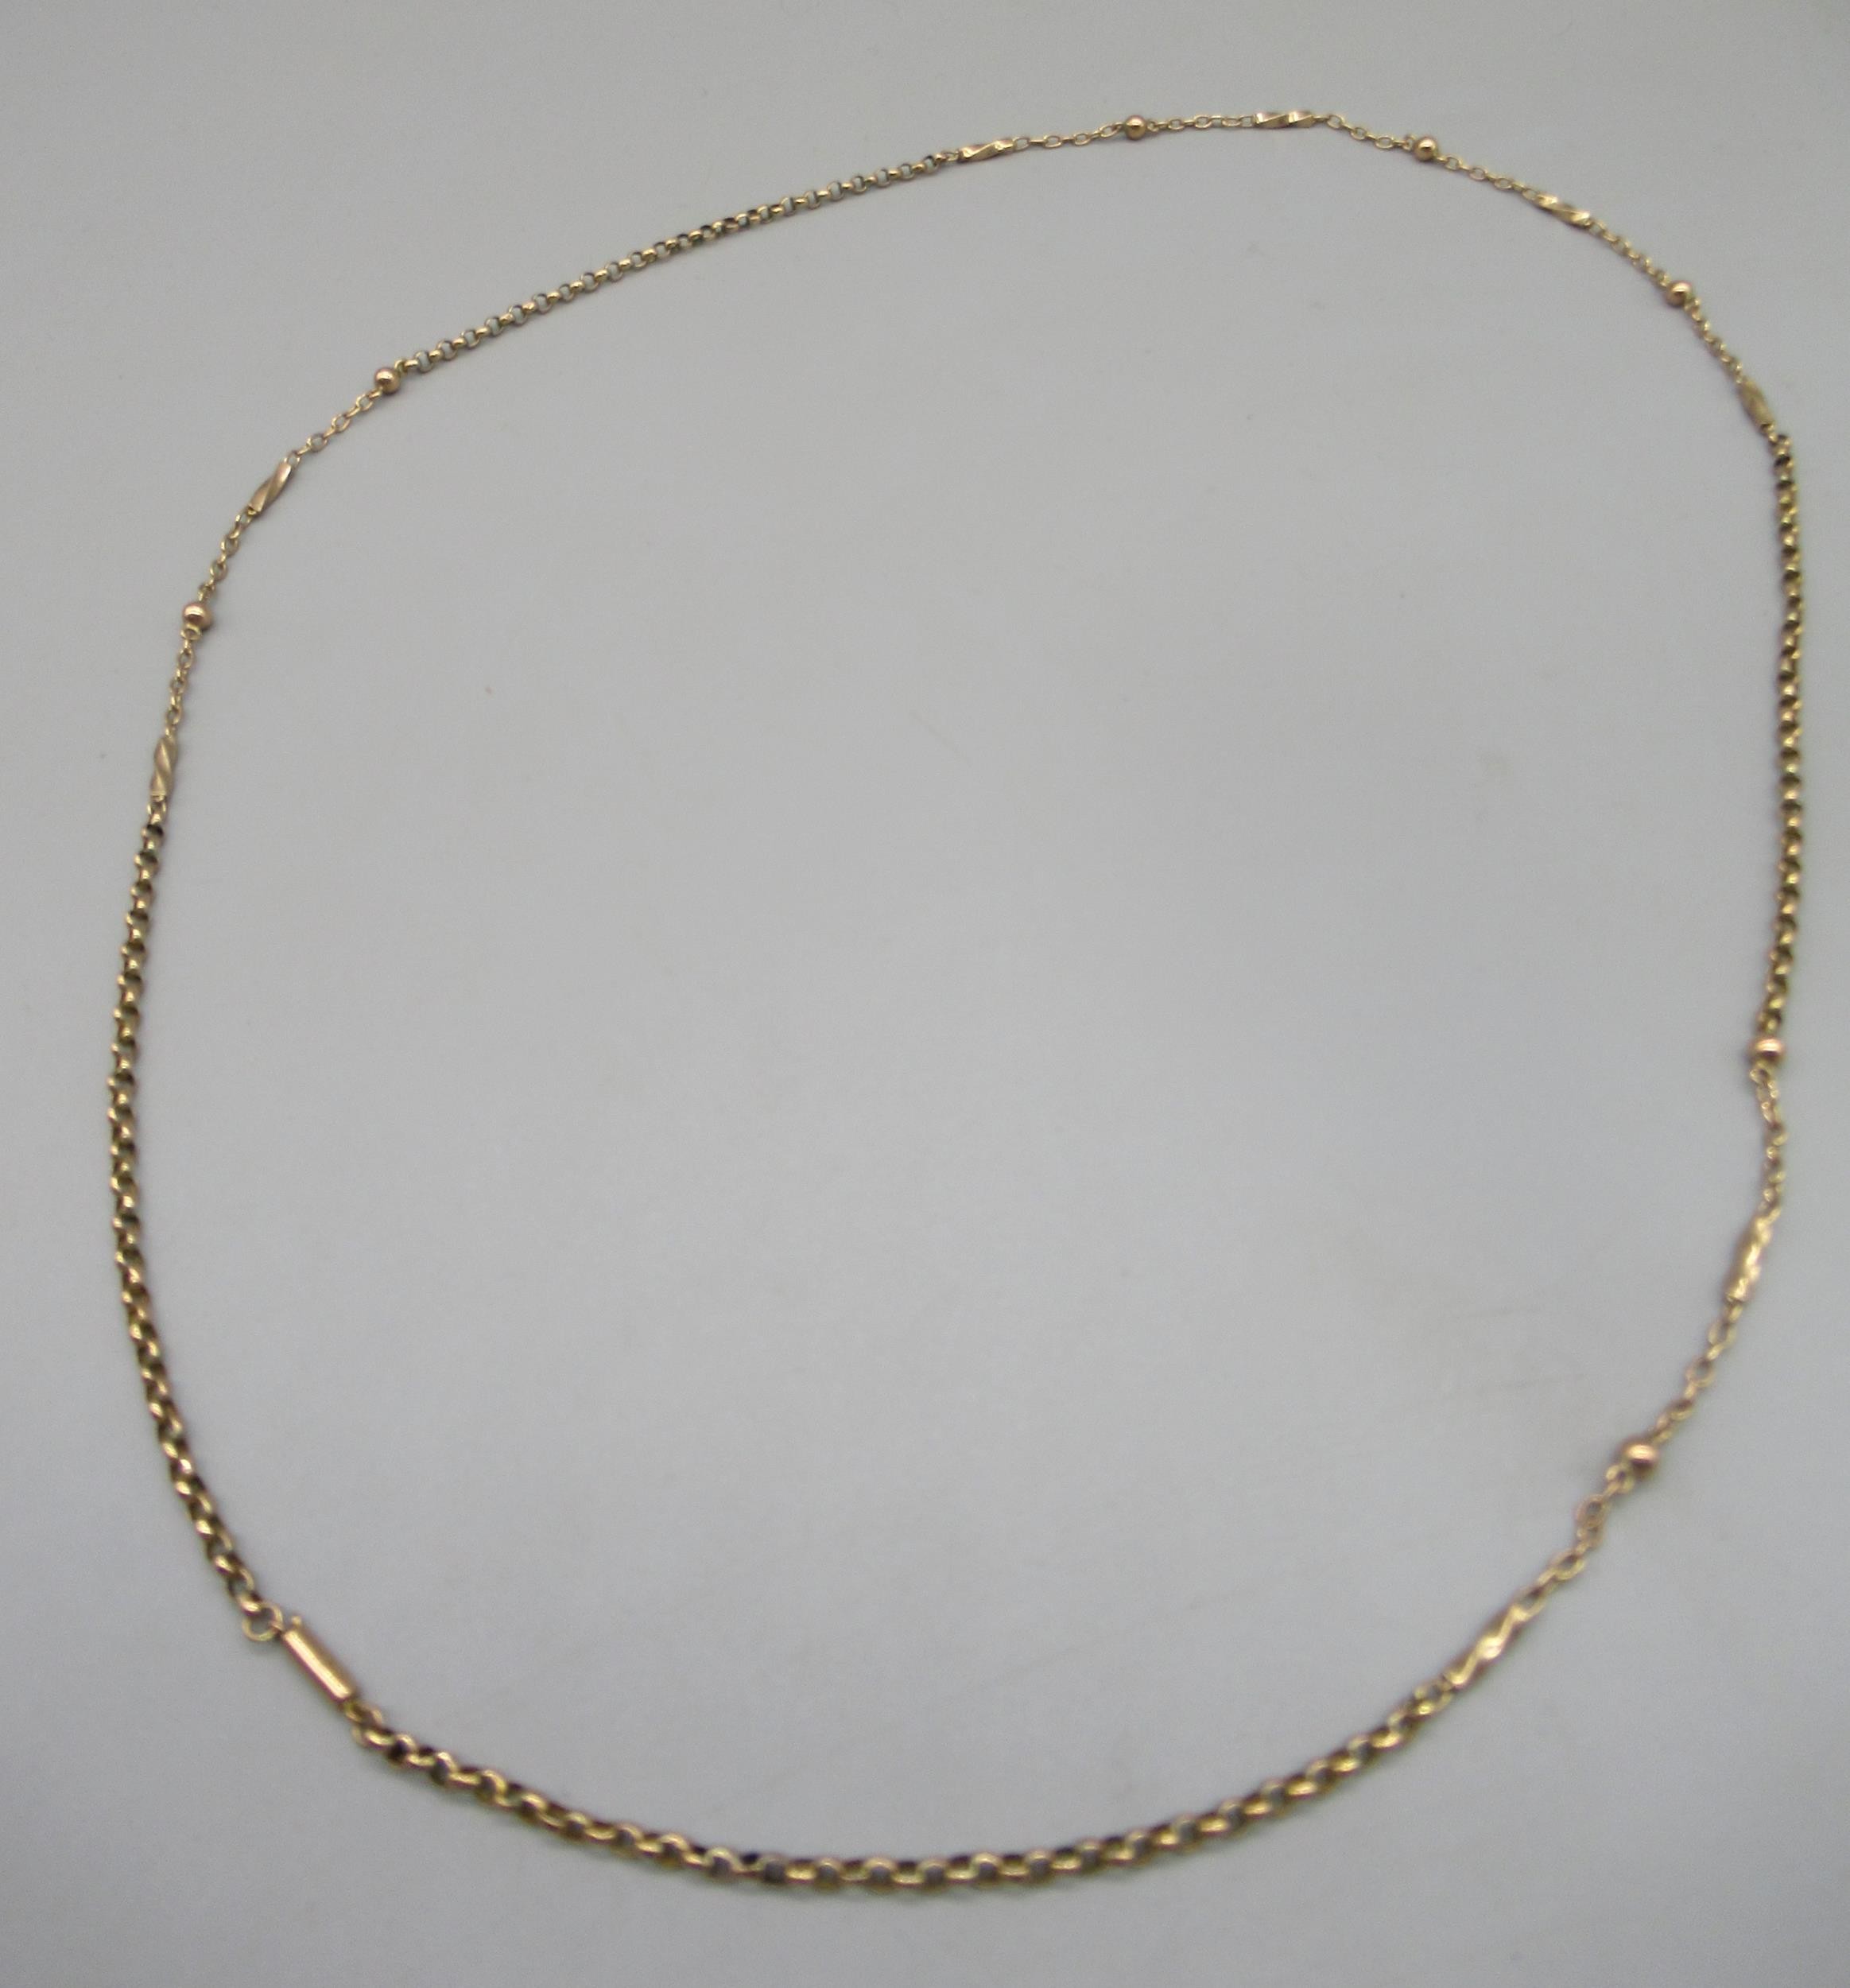 9ct yellow gold belcher chain necklace with bead and twisted bar detail ...